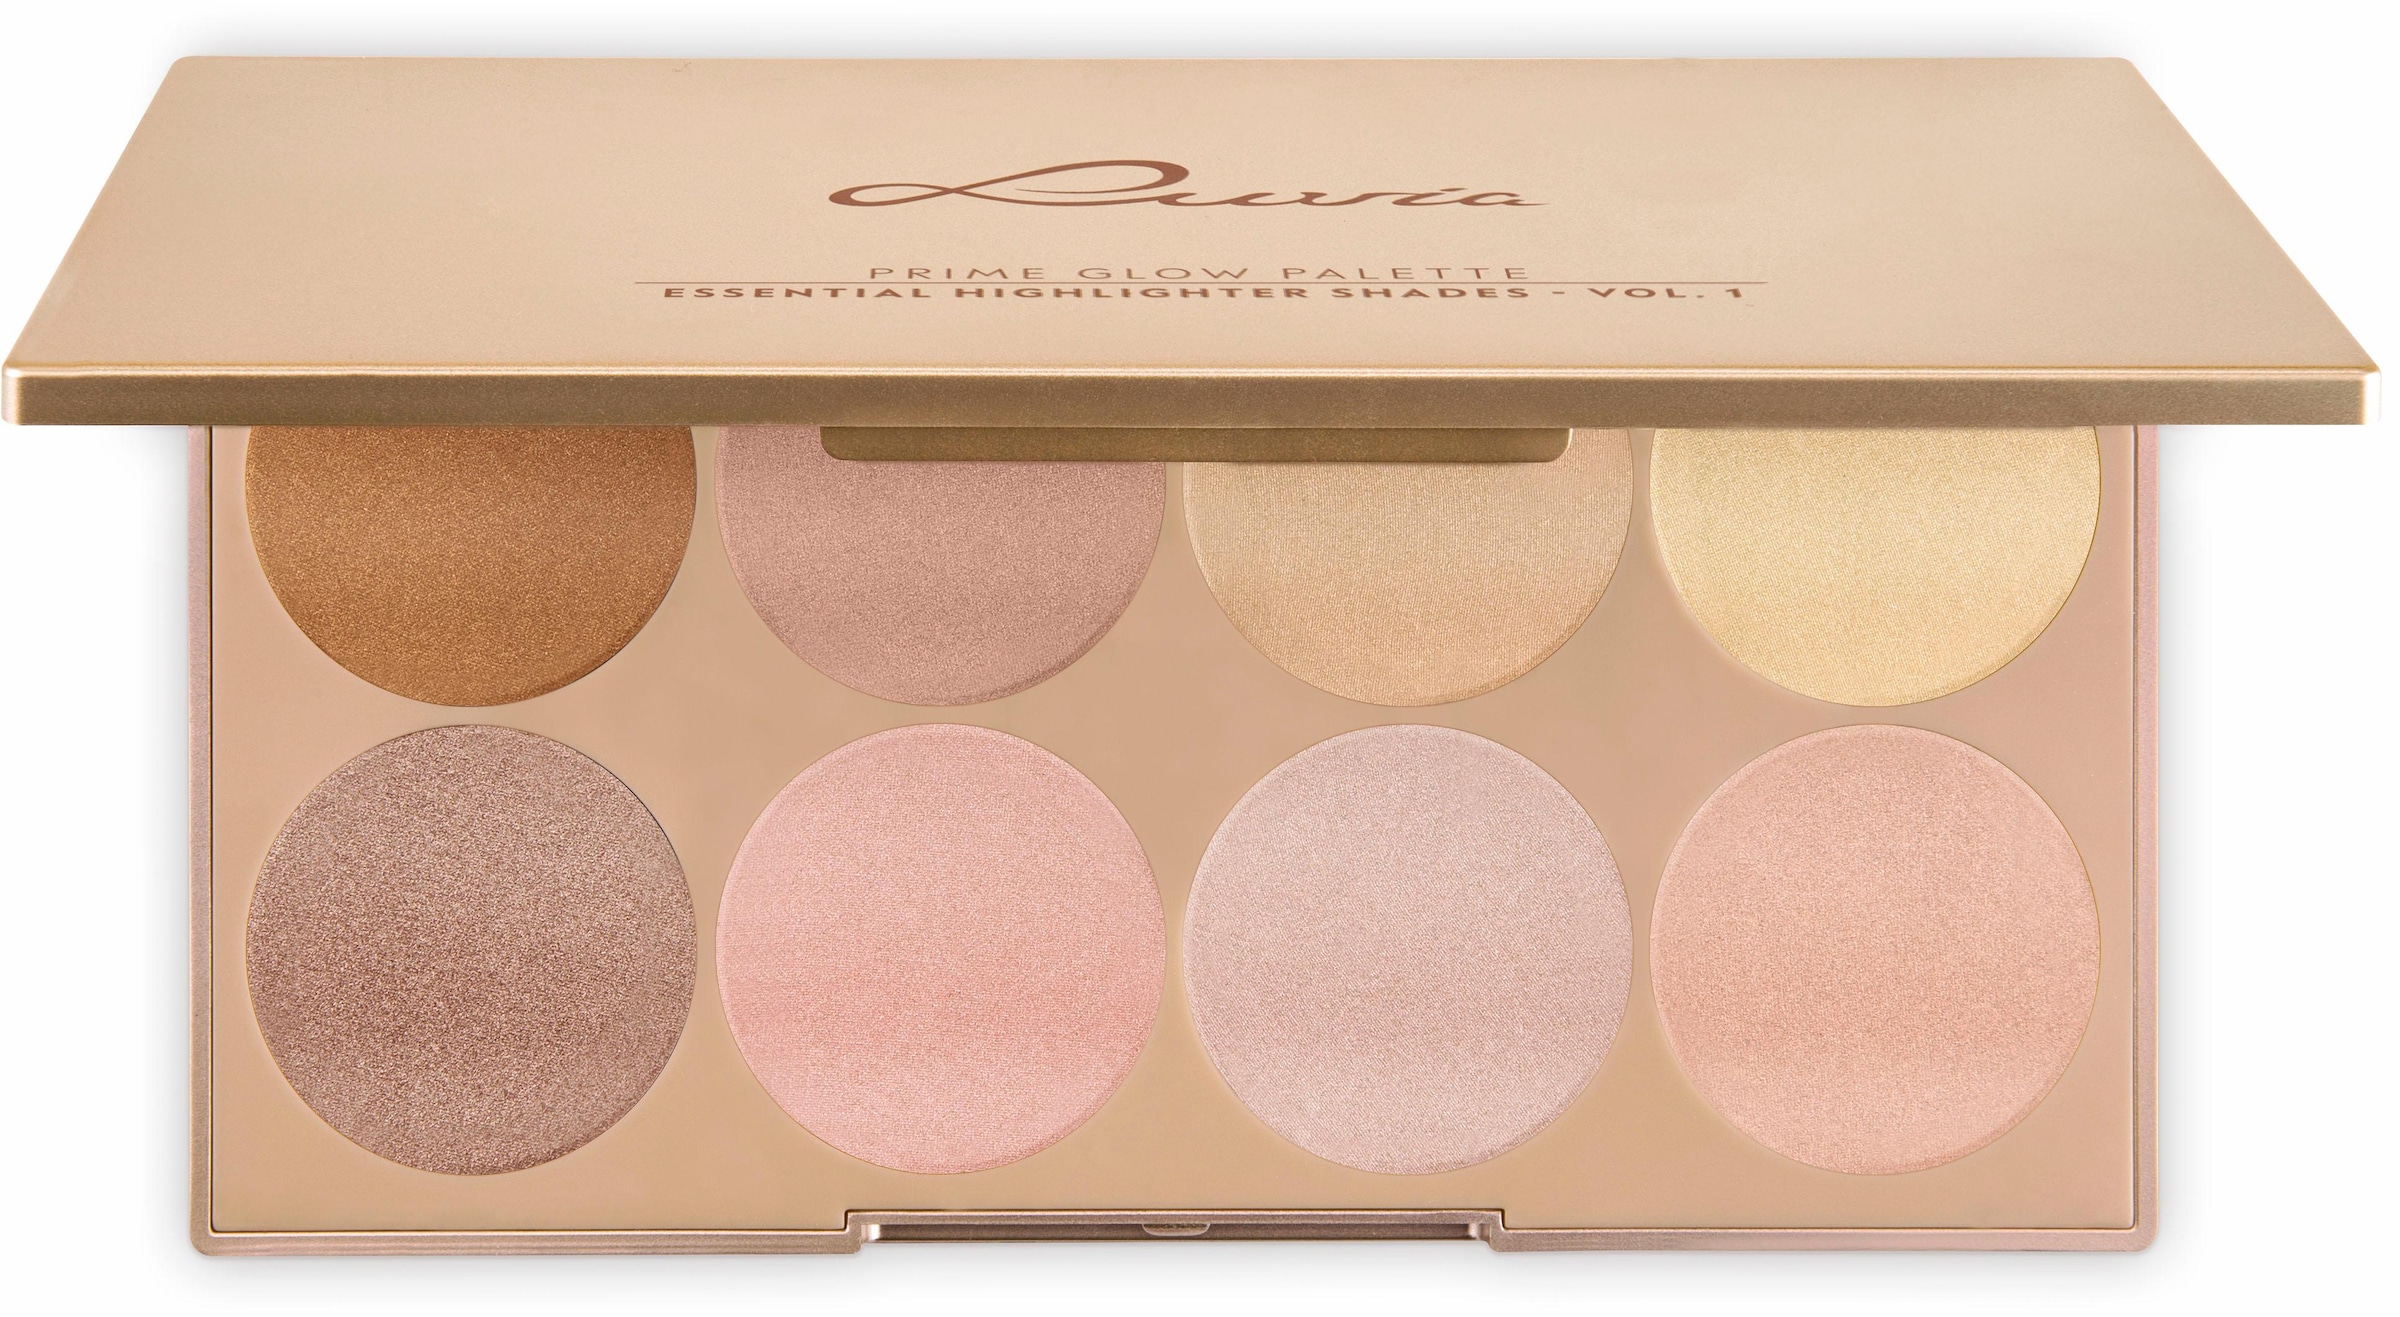 Glow 1« Essential Cosmetics 8 Shades »Prime Vol. Highlighter-Palette tlg.) Contouring (8 Luvia Farben